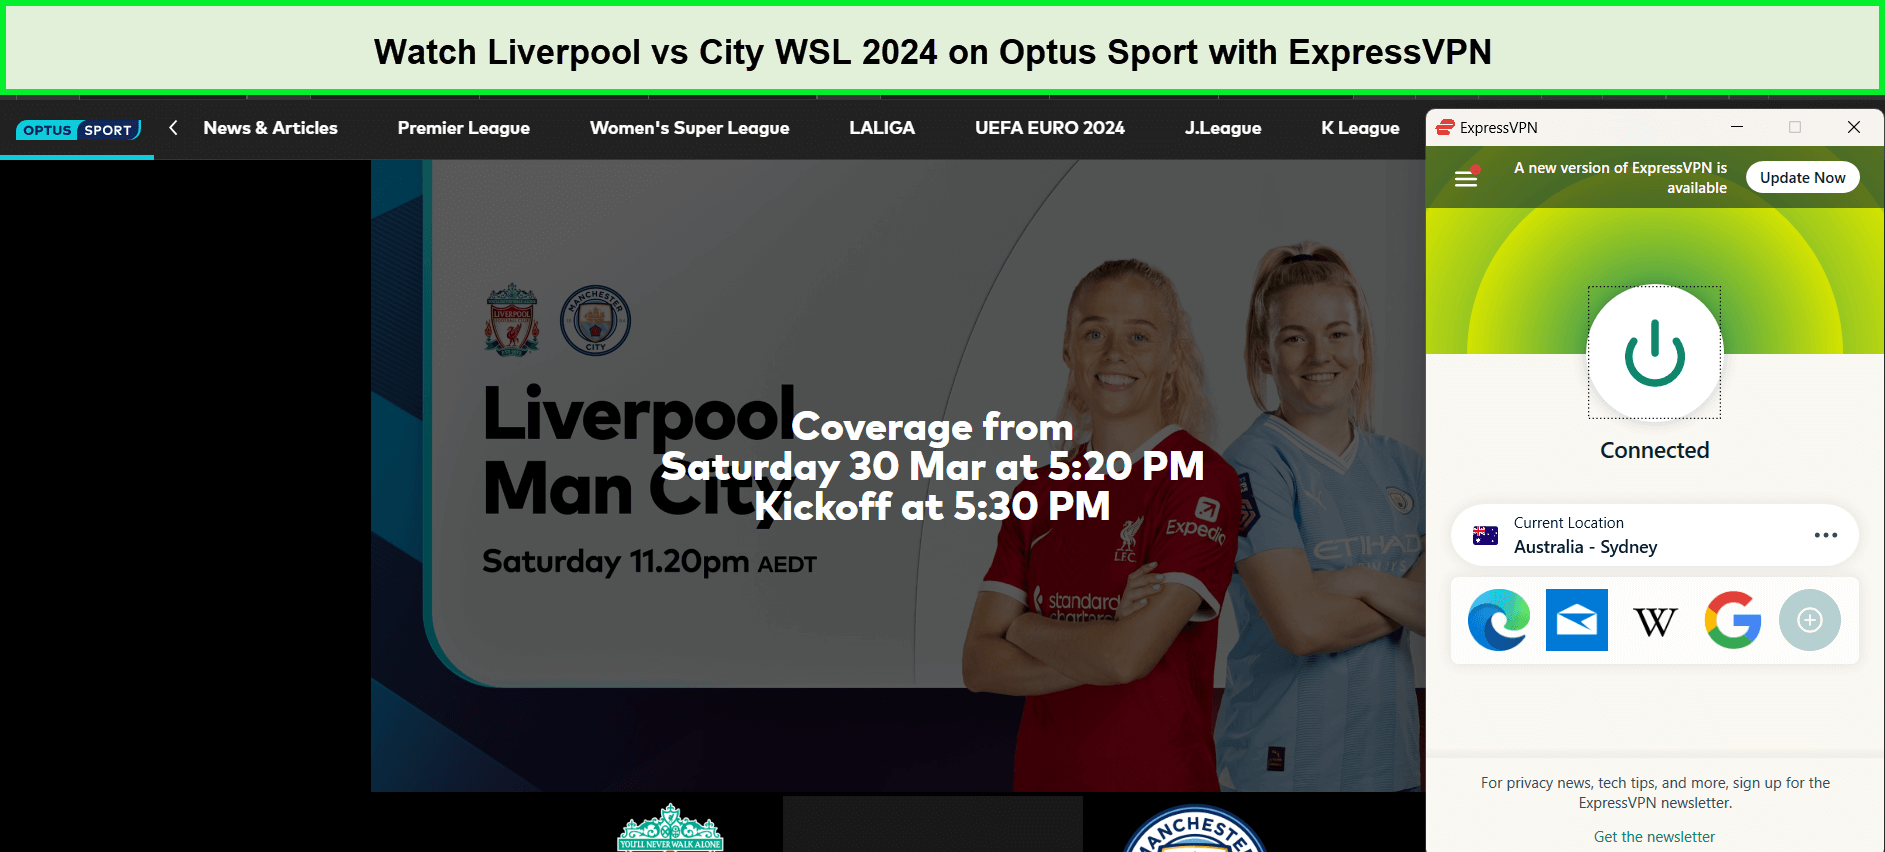 watch-Liverpool-vs-City-WSL-2024-in-South Korea-on-Optus-Sport-with-expressvpn